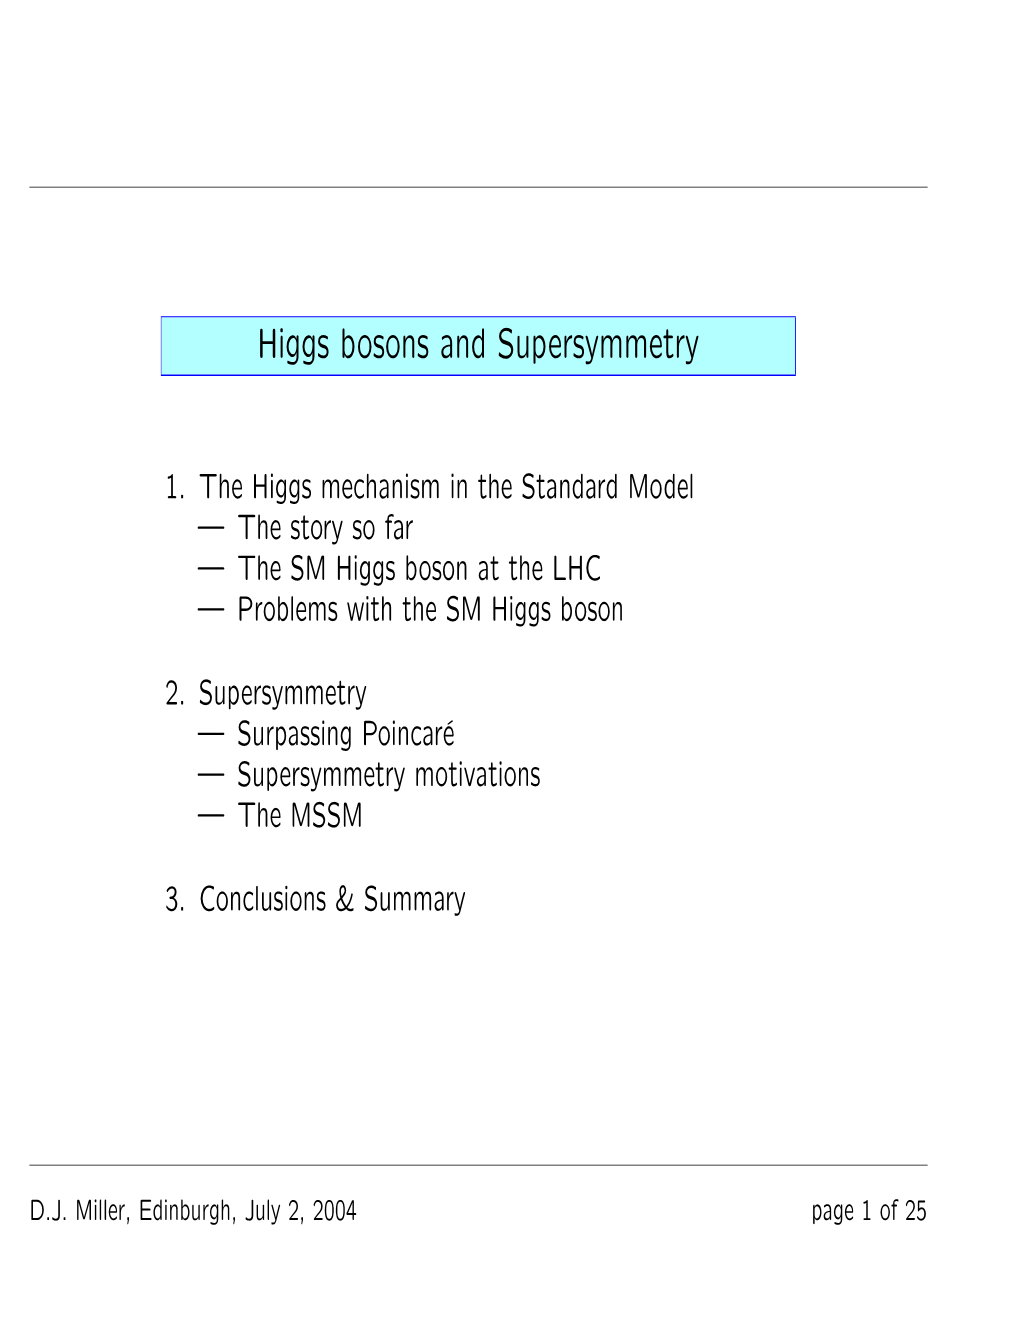 Higgs Bosons and Supersymmetry